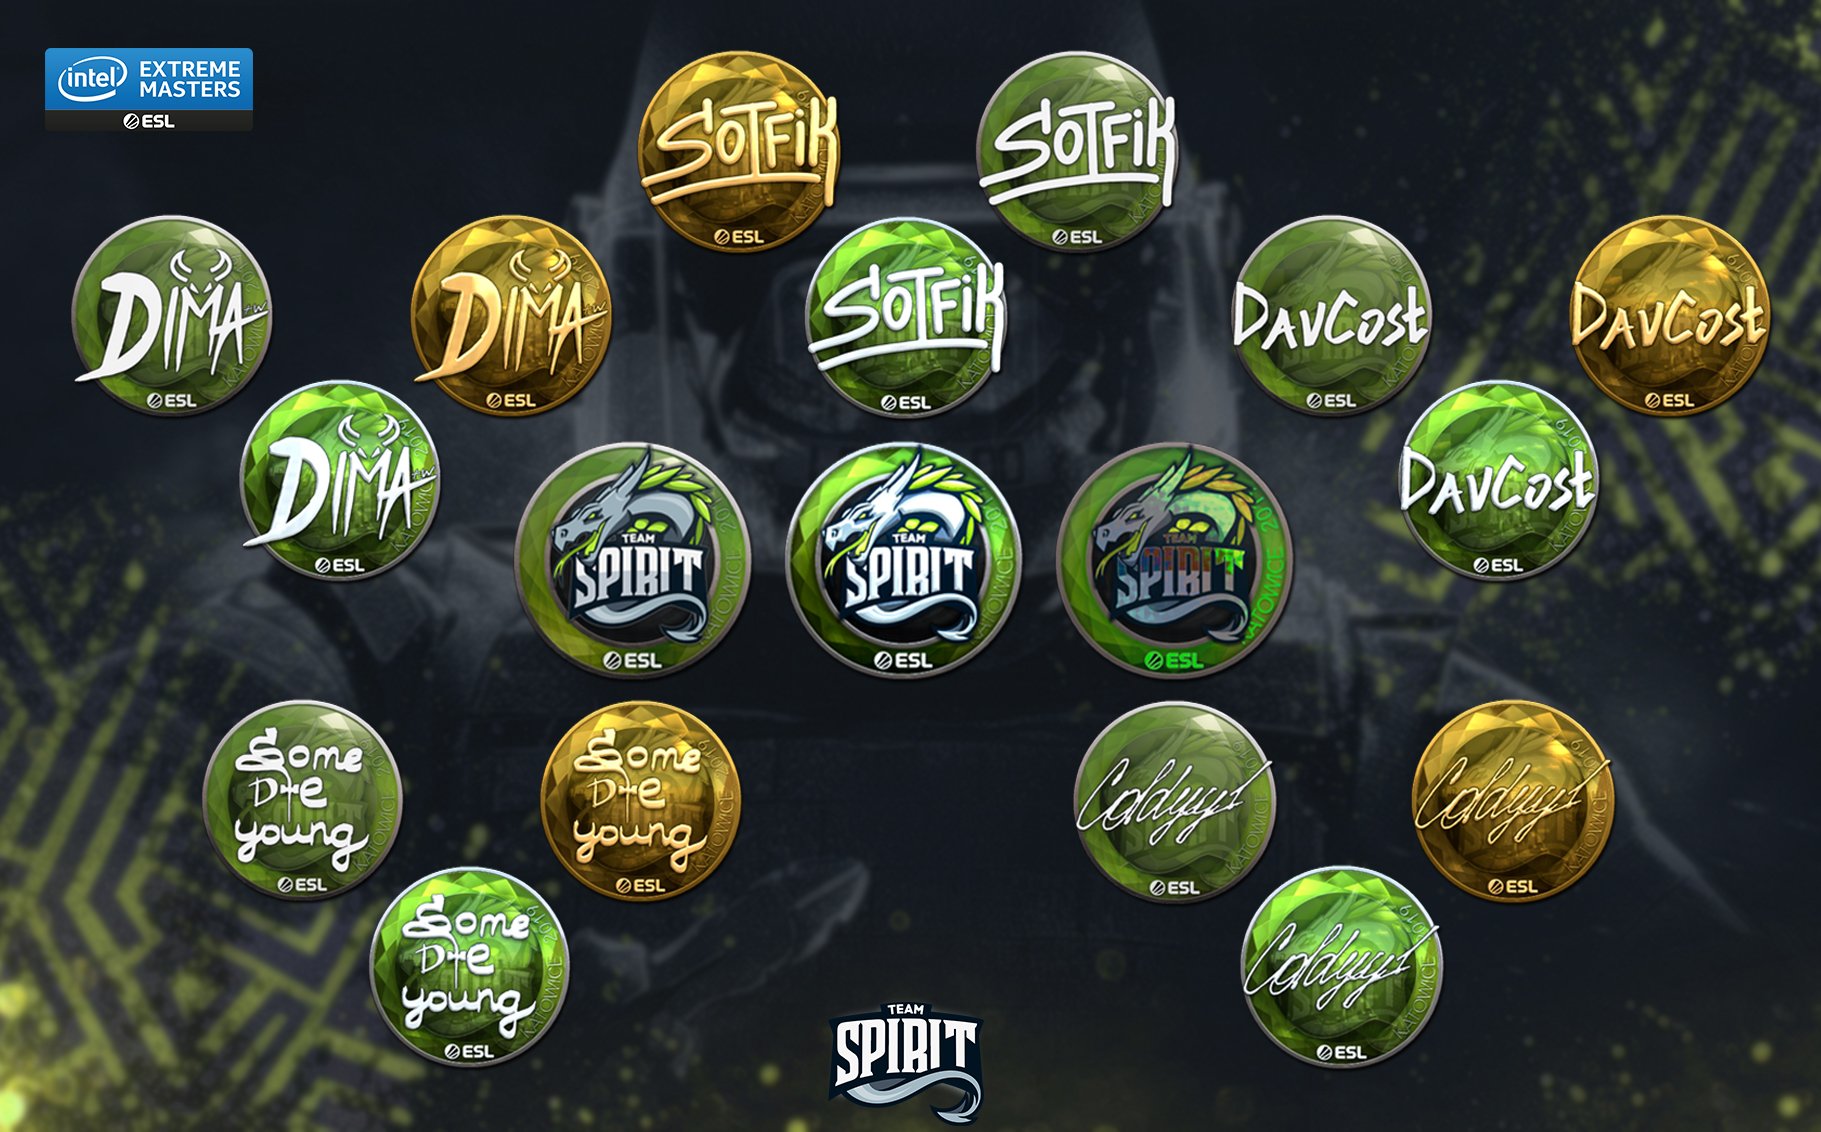 Uživatel Team Spirit na Twitteru: Katowice Major 2019 stickers are out! 😎 Check Team Spirit's one! Which one would you get? # CSGO https://t.co/CBSSEA1fDg“ / Twitter